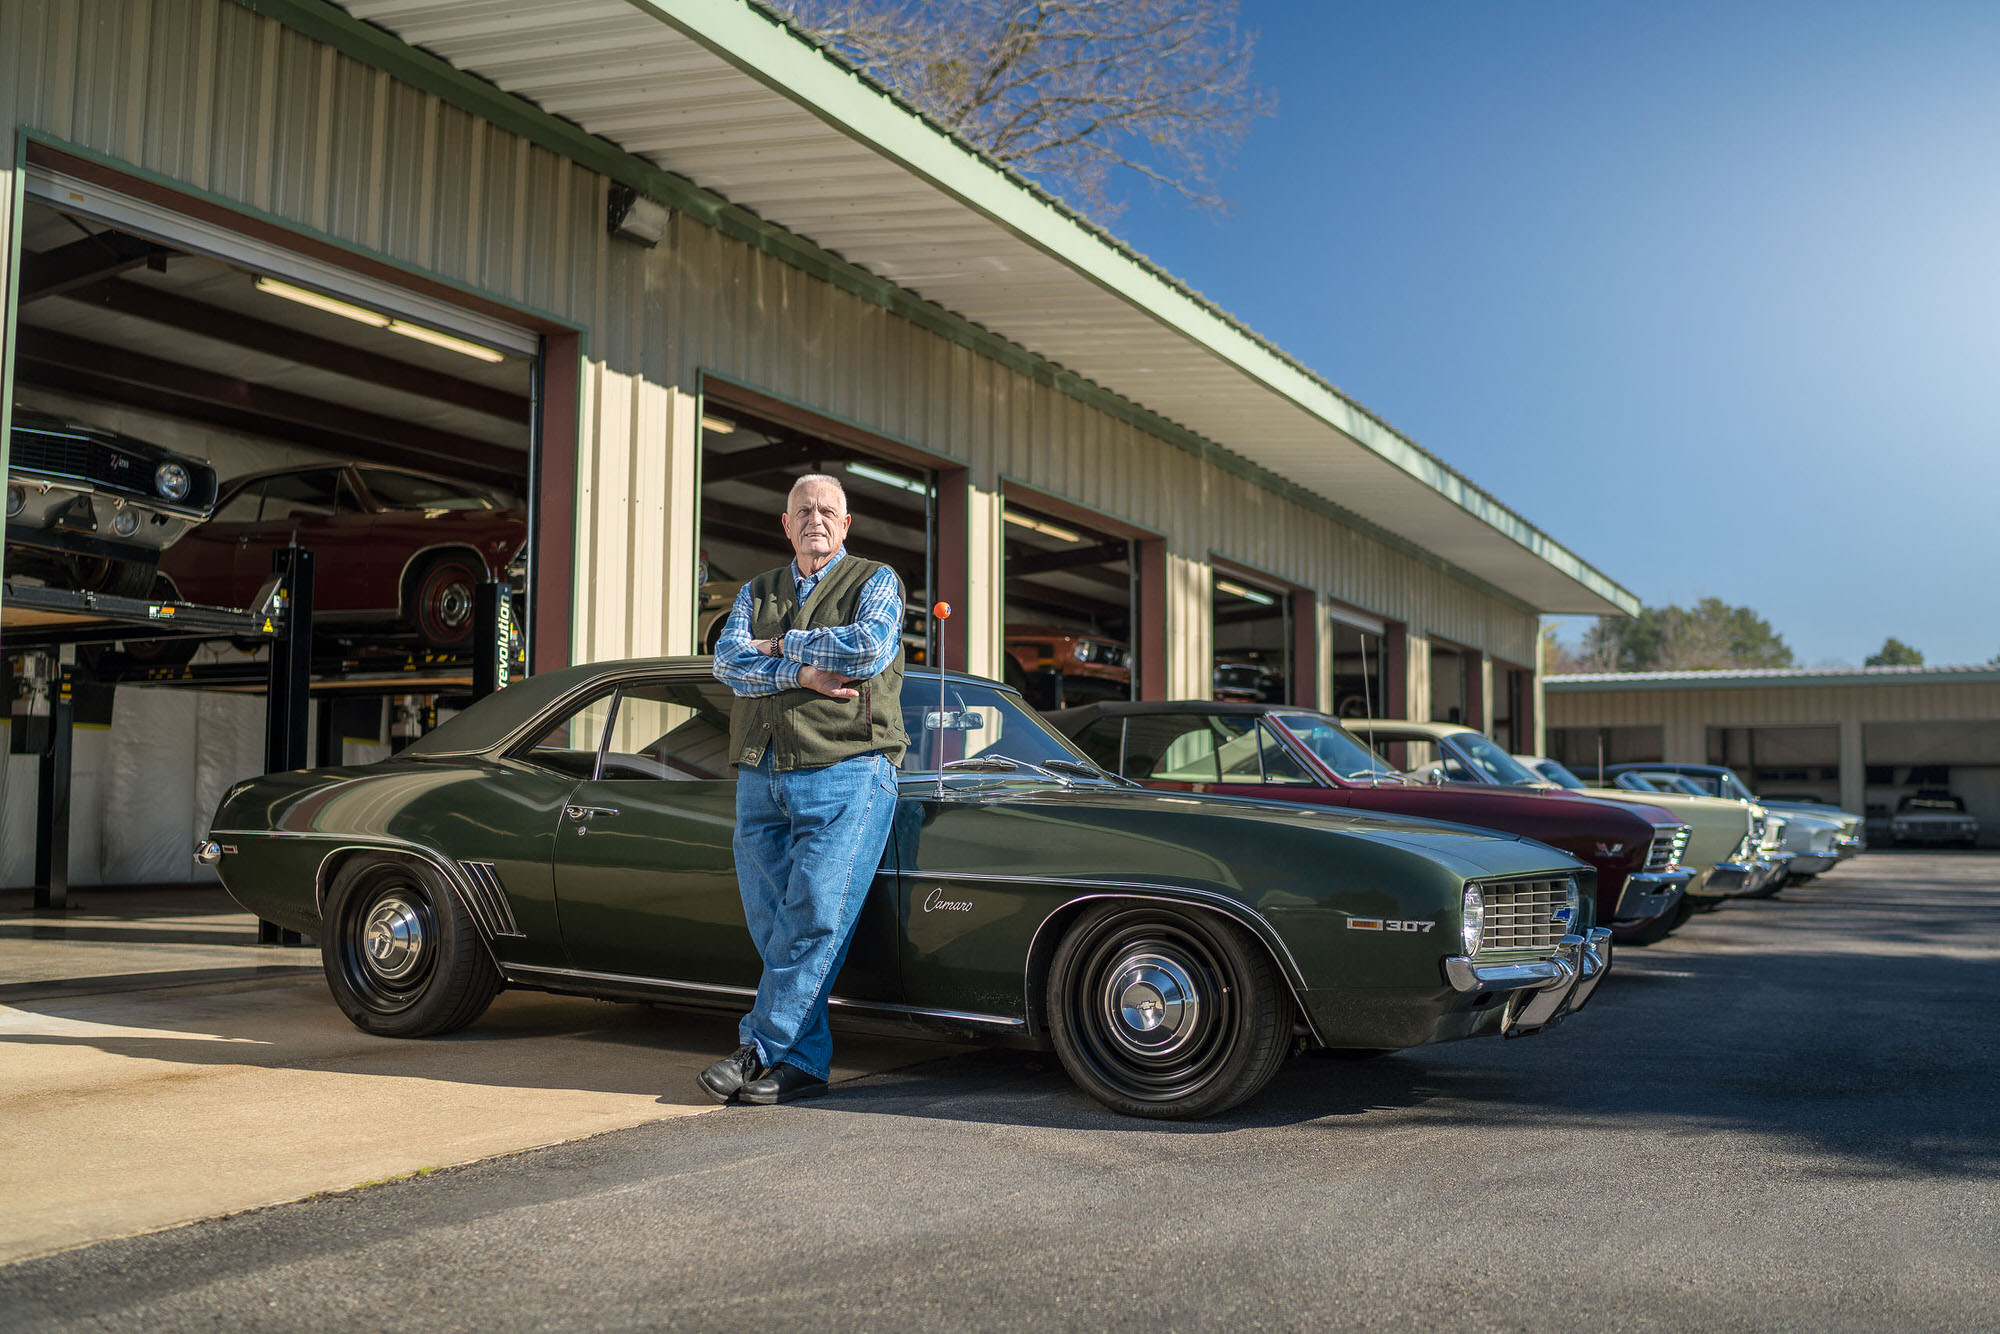 Hot Rod Legend George Poteet in Mississippi photographed for Car and Driver magazine